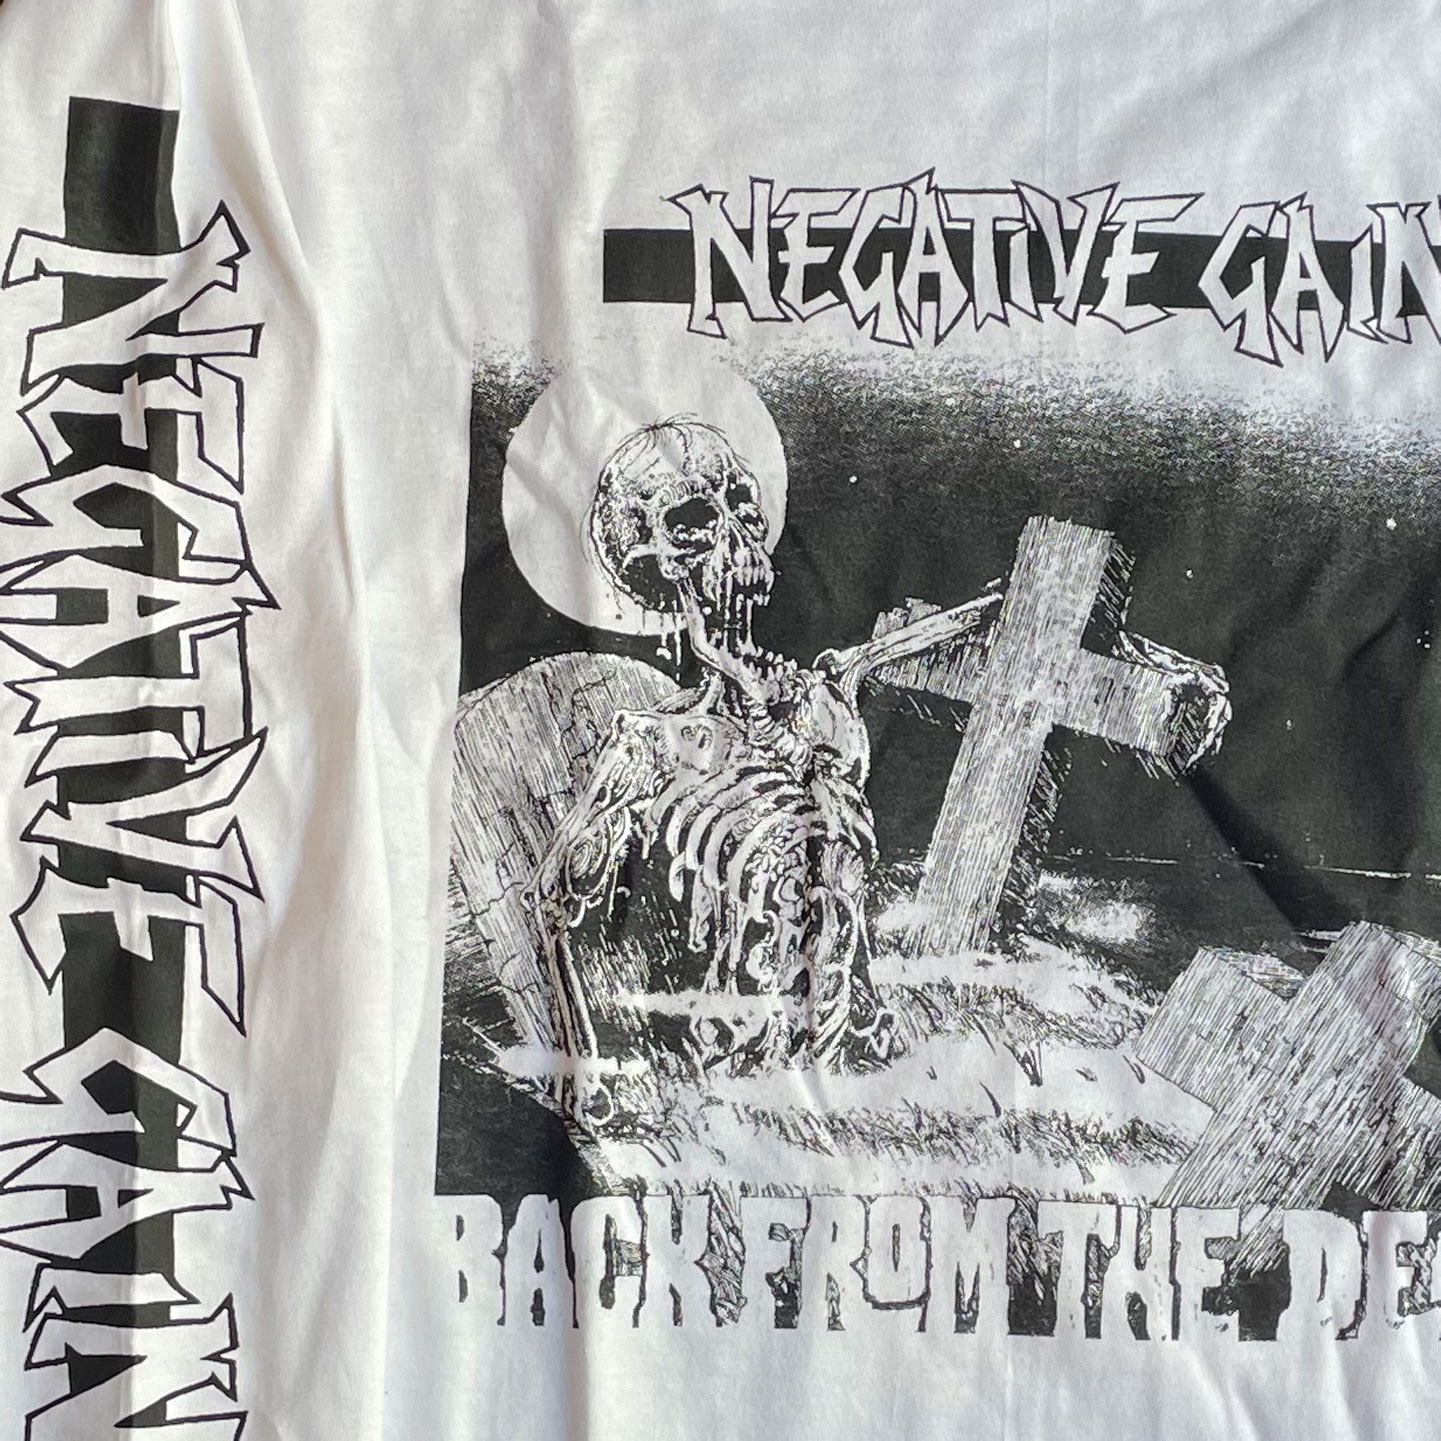 NEGATIVE GAIN ロングスリーブTシャツ BACK FROM THE DEAD